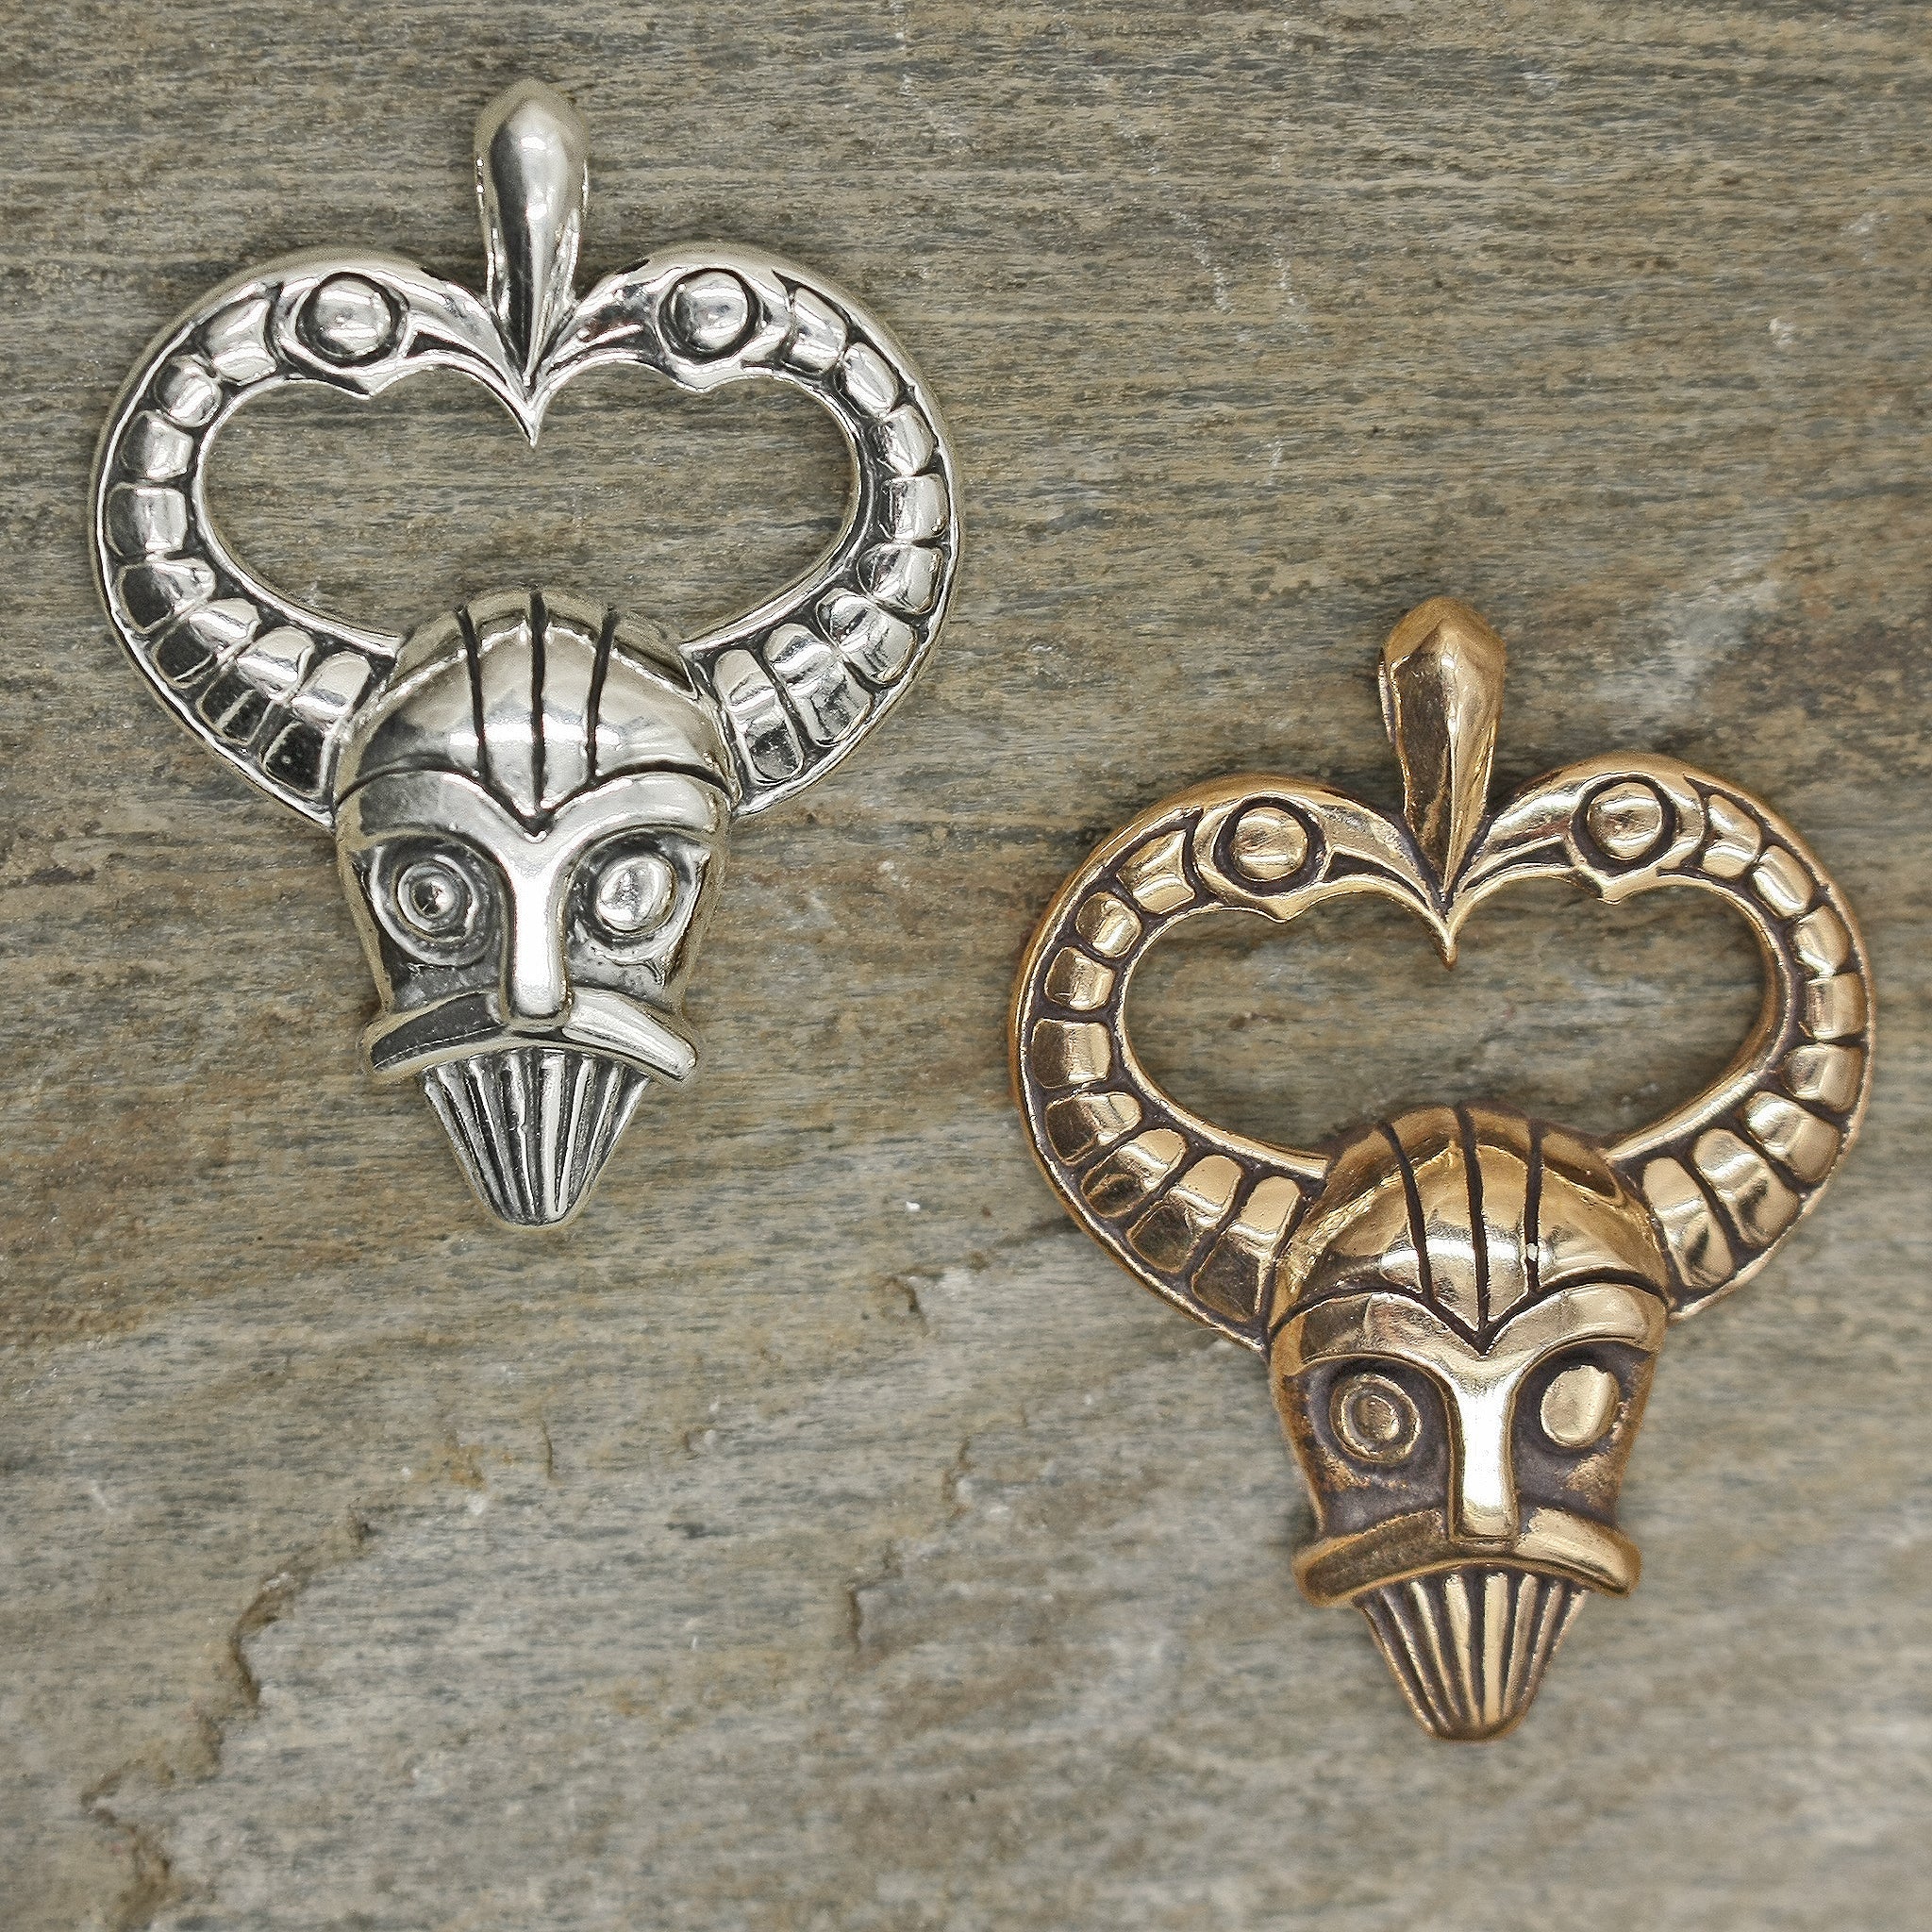 Odin Mask Pendants with Twin Raven Horns on Rock - Silver and Bronze